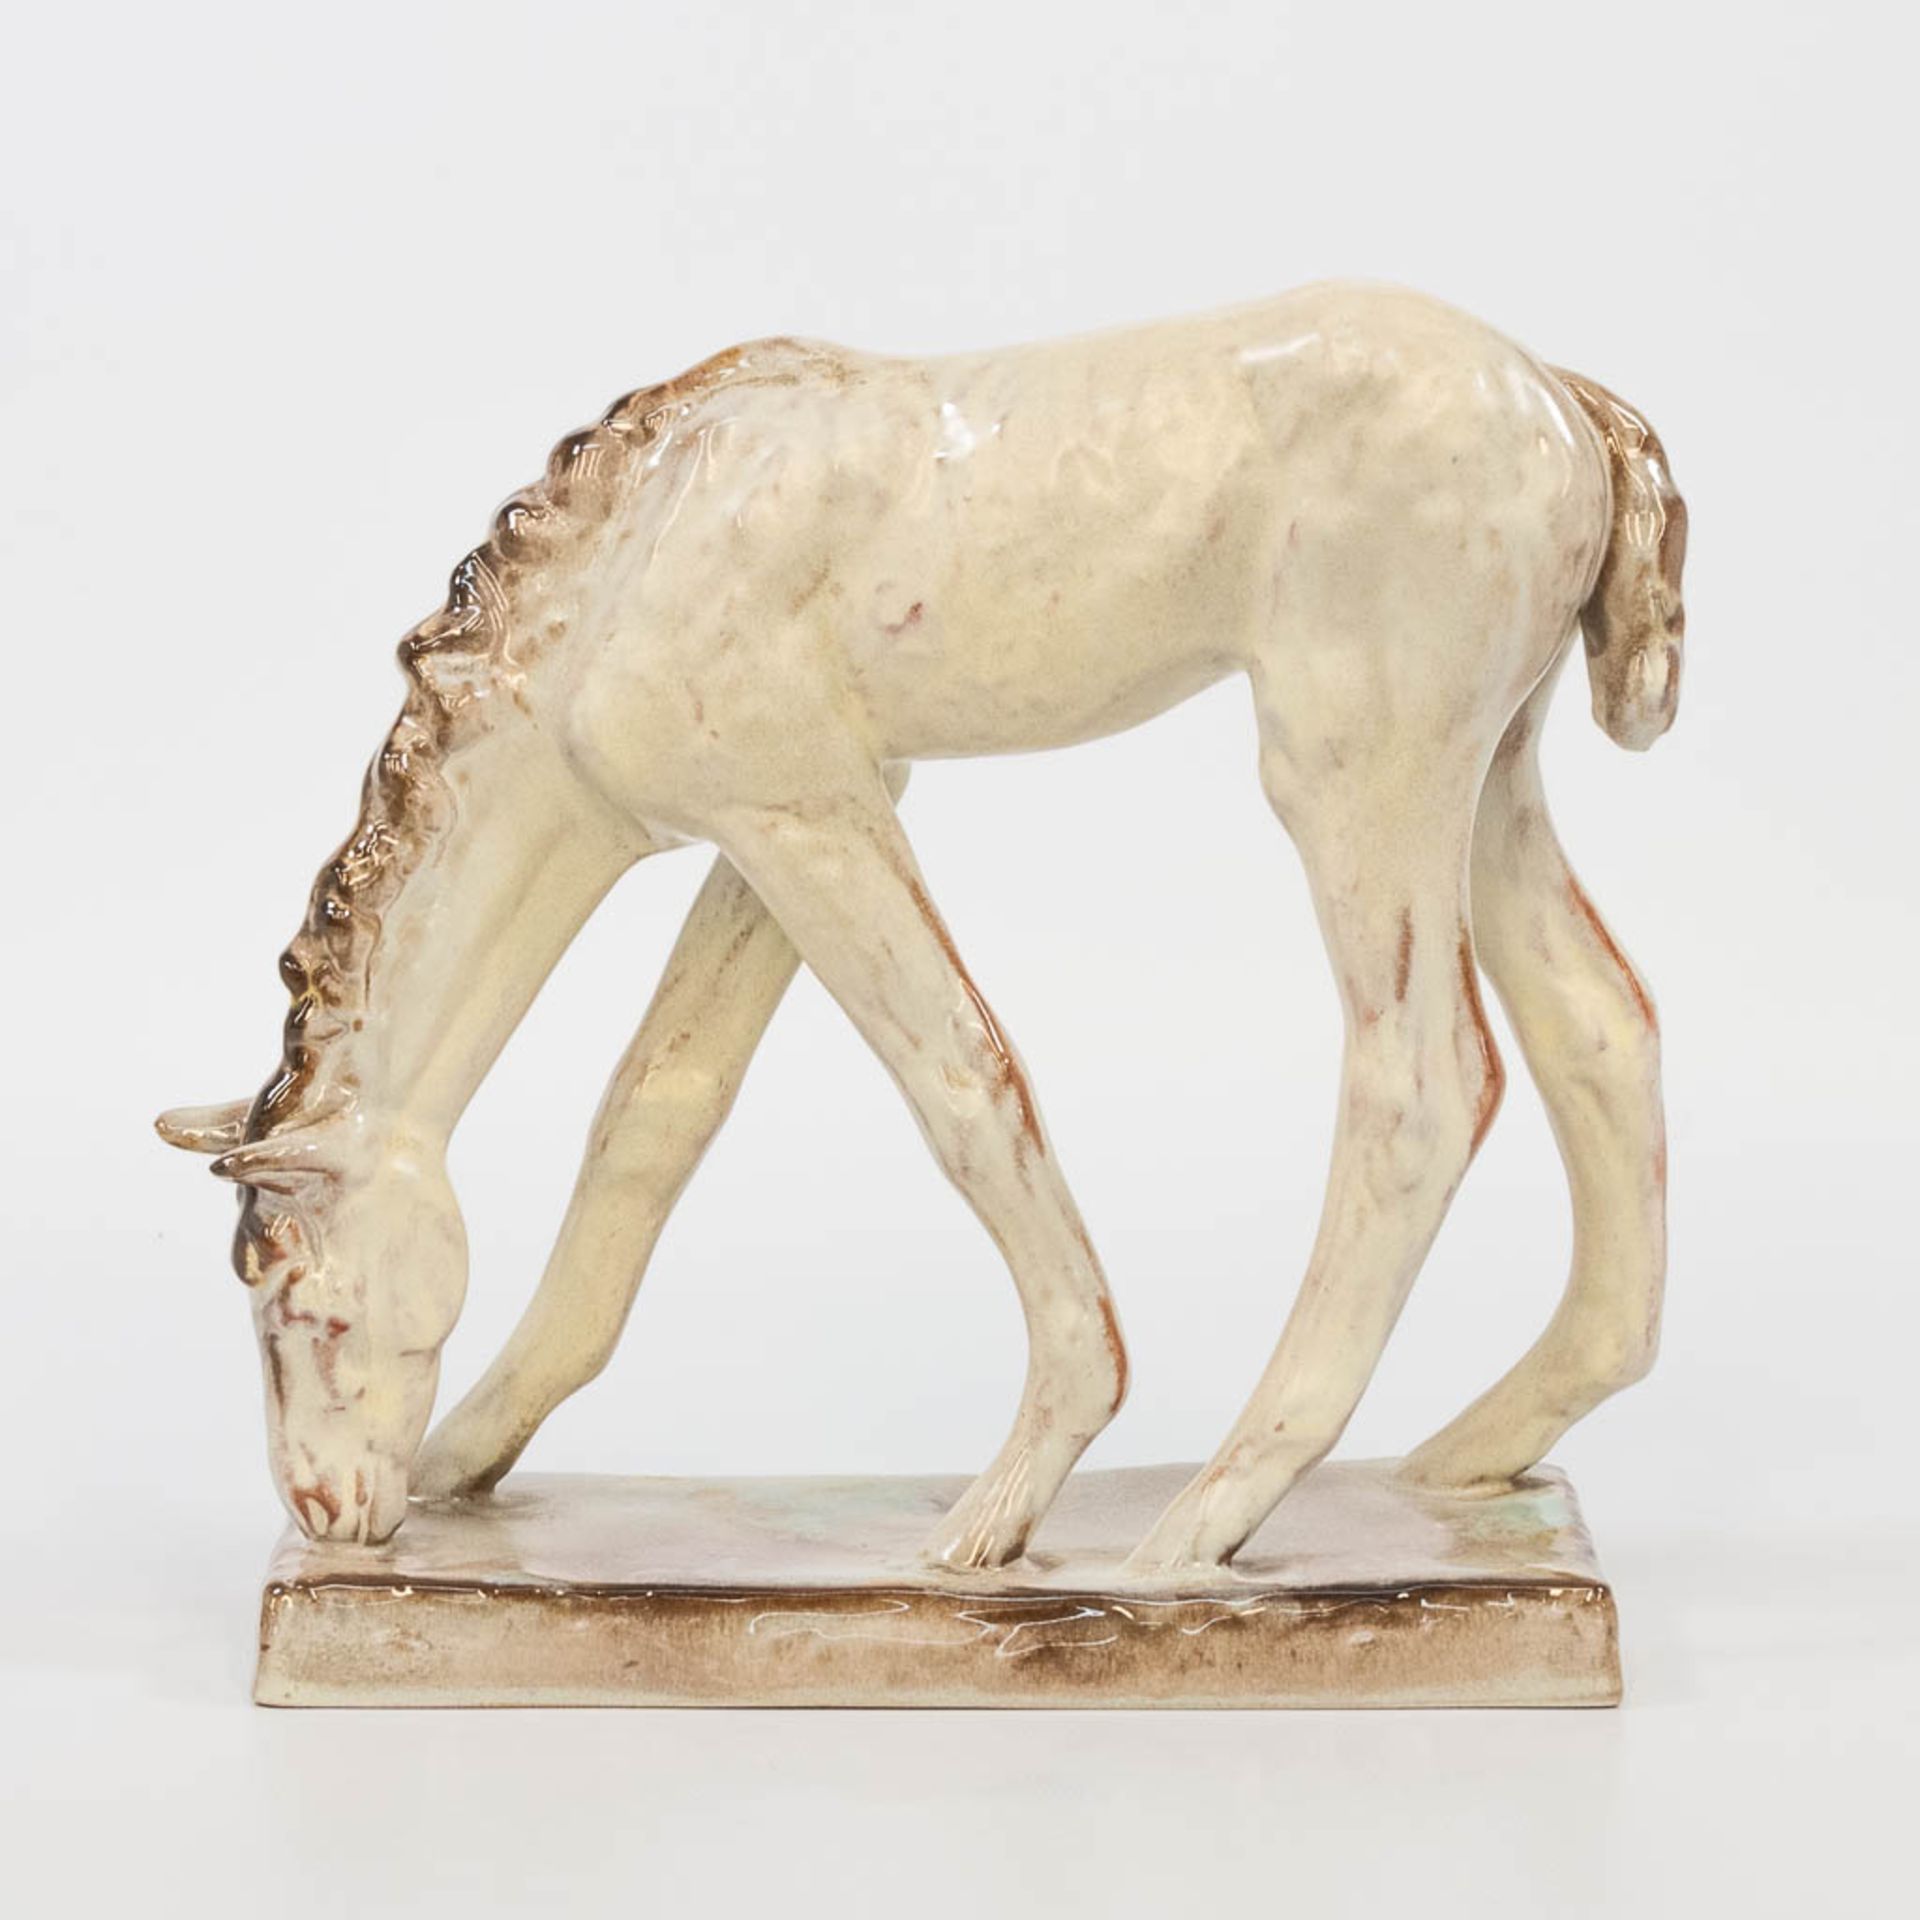 Else BACH (1899-1950) for Karlsruhe Majolica, a statue of a horse. (9 x 23 x 21,5 cm) - Image 7 of 16